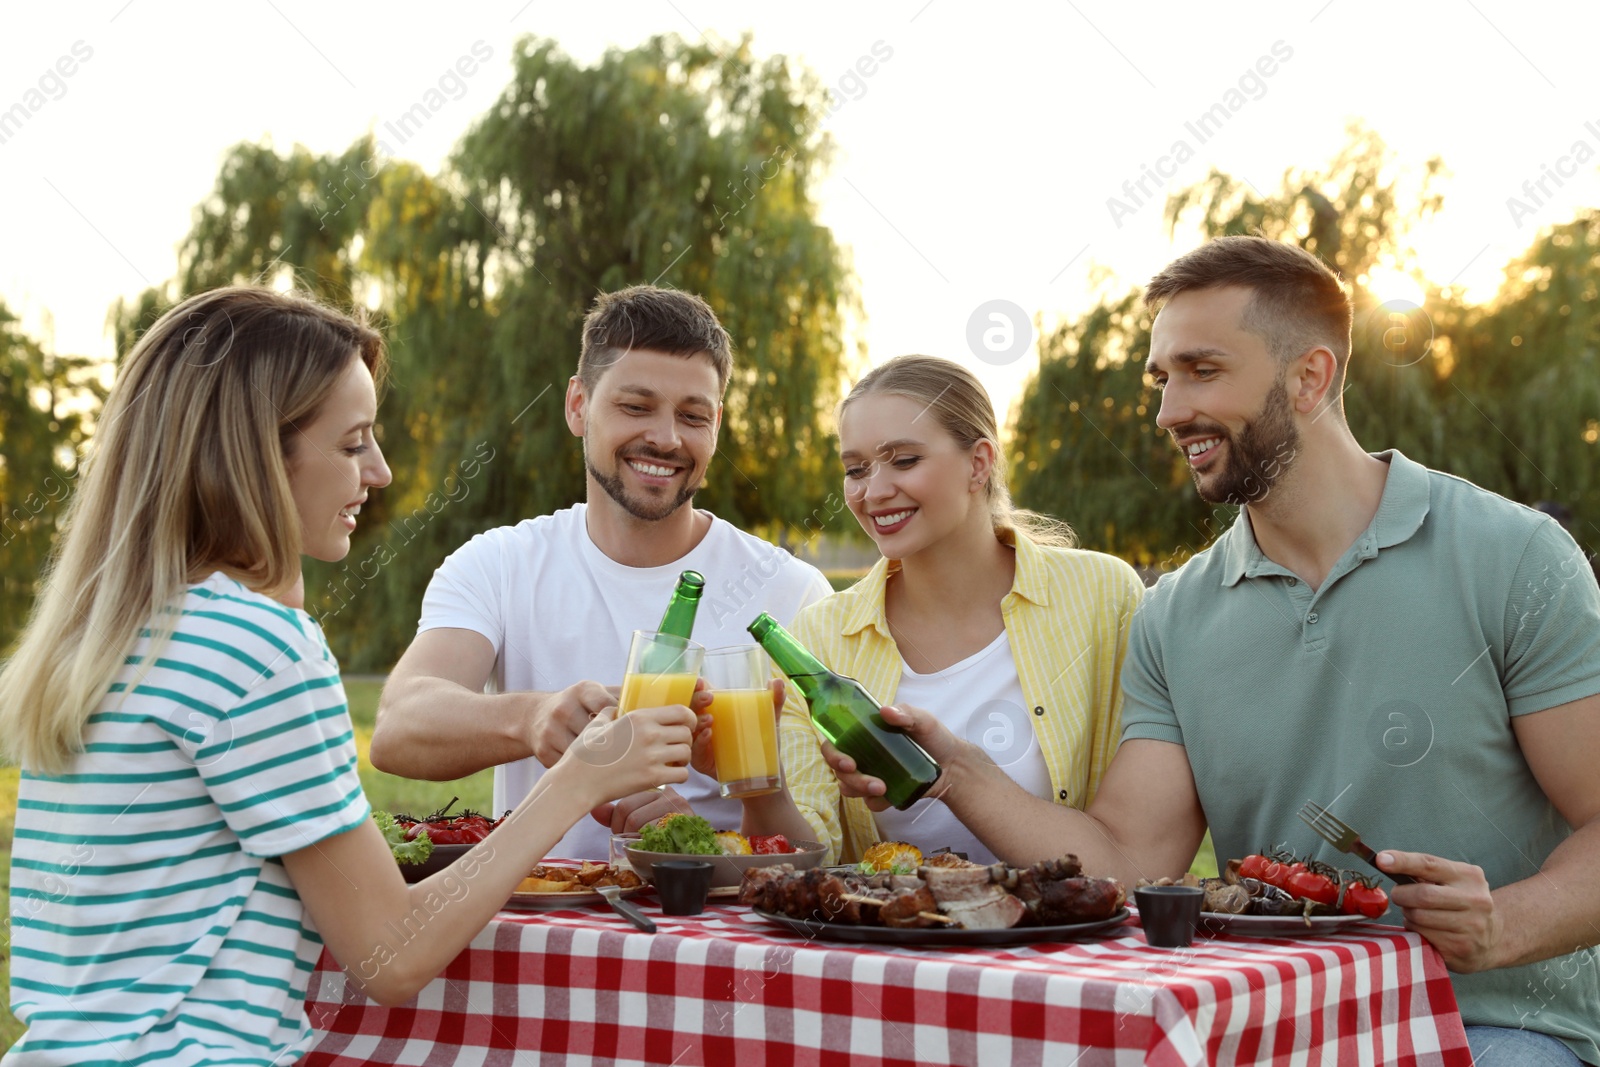 Photo of Happy friends with drinks and food at barbecue party in park